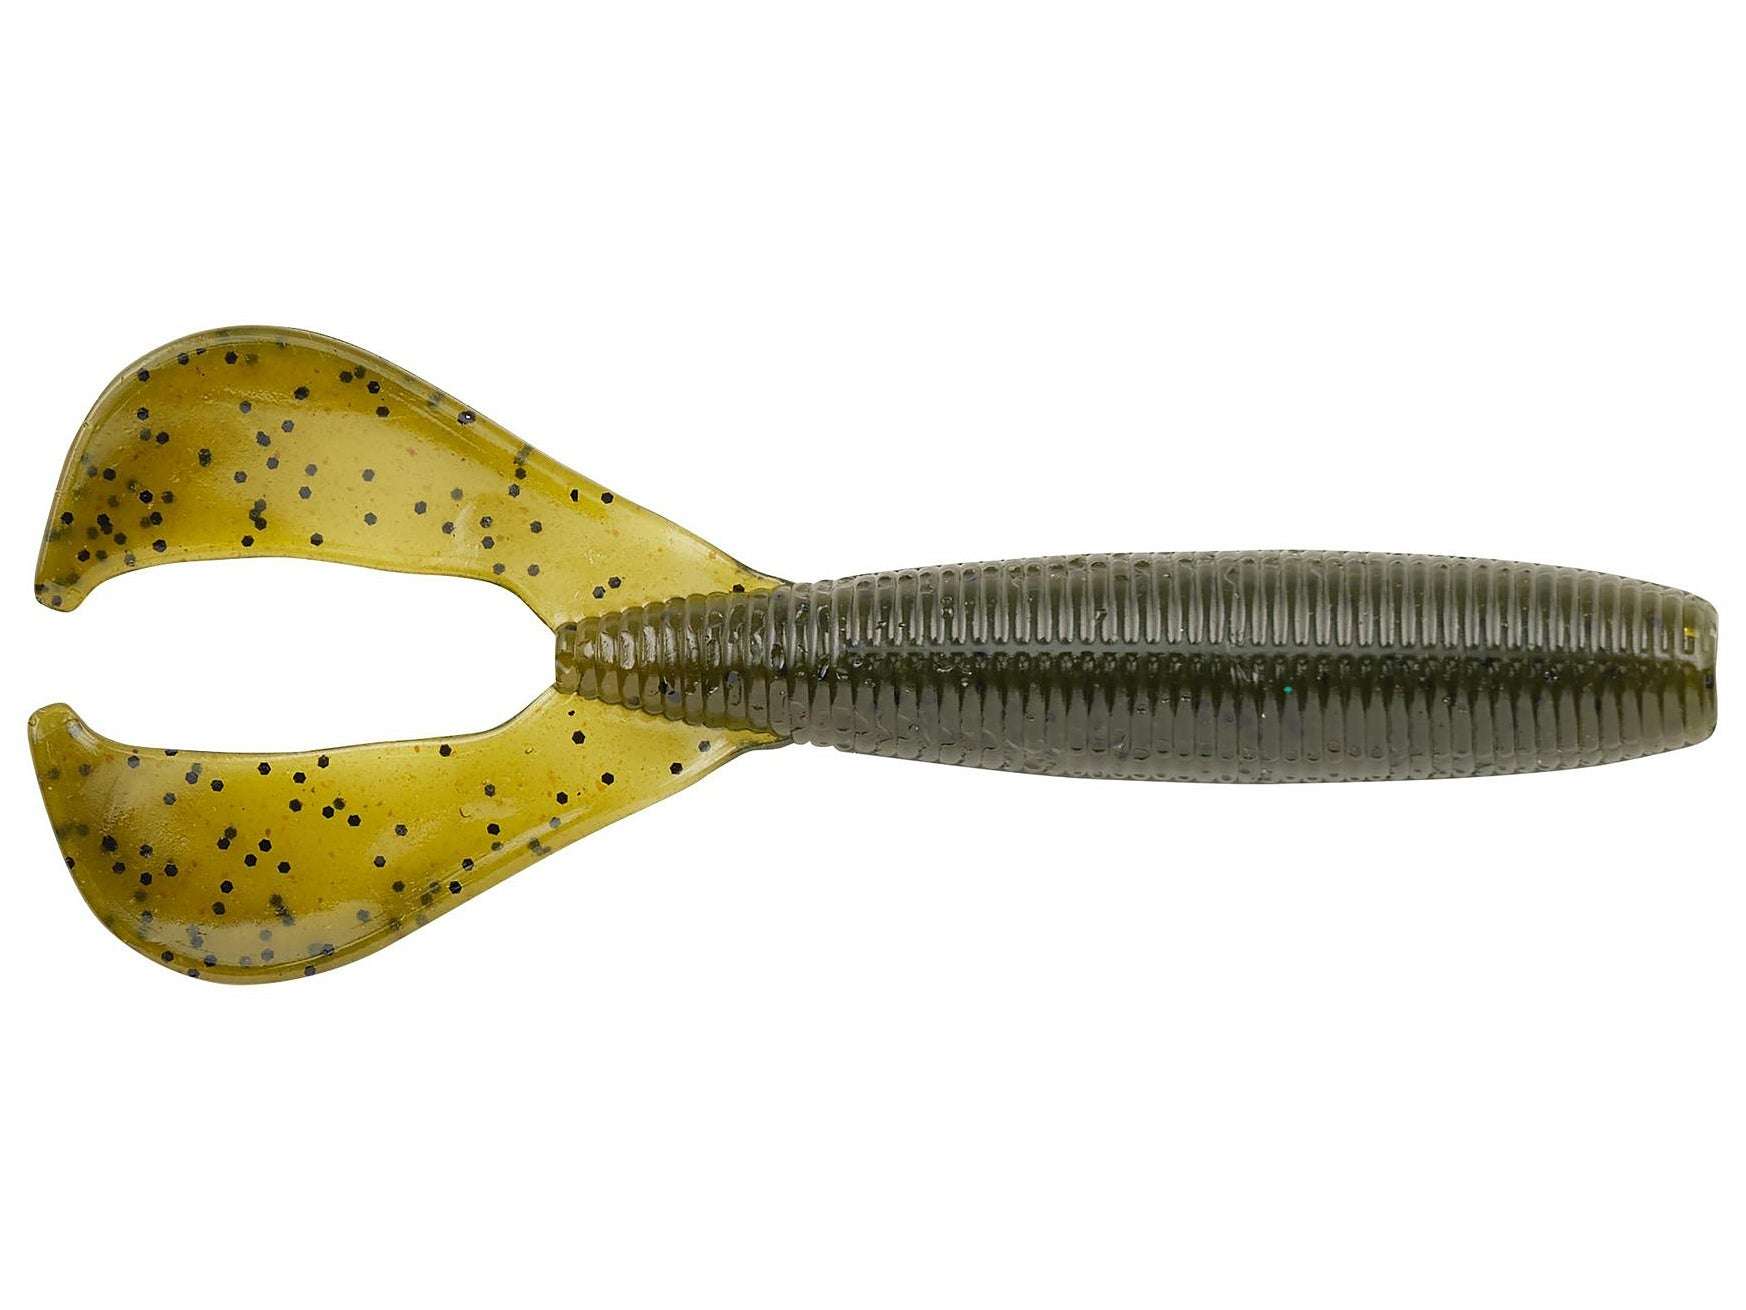 <p><strong>Berkley Powerbait Boss Grub</strong><br> Versatility is the name of the game when it comes to the Berkley Powerbait Boss Grub. The Boss Grub features a chunky, traditional grub body that makes the bait extremely durable with twin tails that displace a lot of water. Available in a 3- and 4-inch size and 12 colors, the Berkley Powerbait Boss Grub can be used as a jig trailer, or fished by itself on a number of different rigs. <a href=